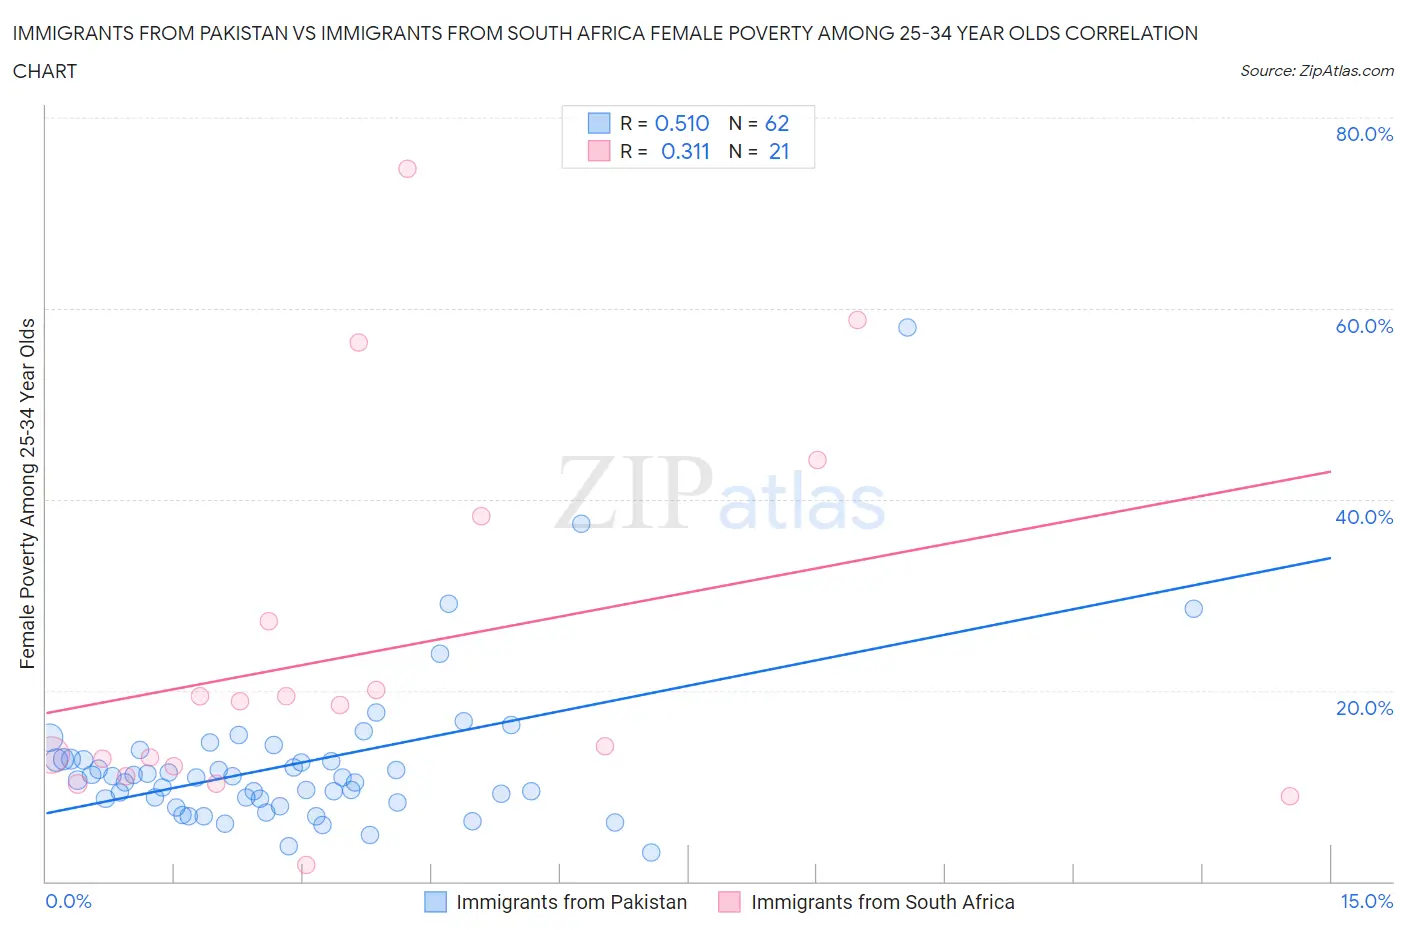 Immigrants from Pakistan vs Immigrants from South Africa Female Poverty Among 25-34 Year Olds